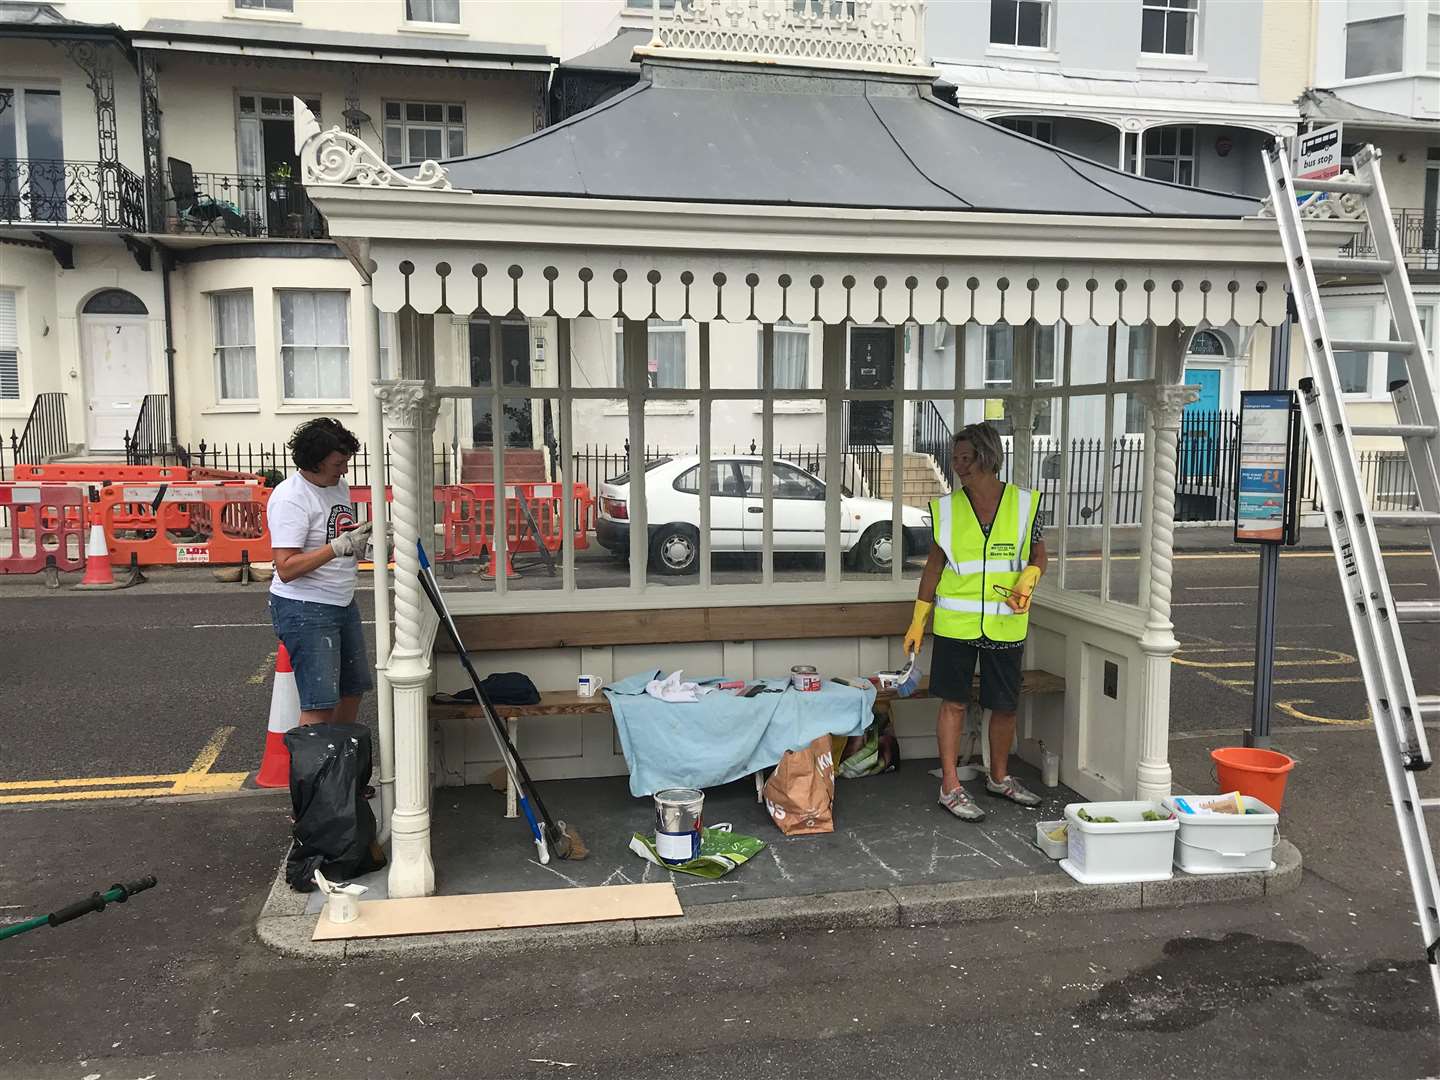 Volunteers from the Ramsgate Society help restore the sea shelters along the seafront in the town. Picture: Ramsgate Society (15175284)